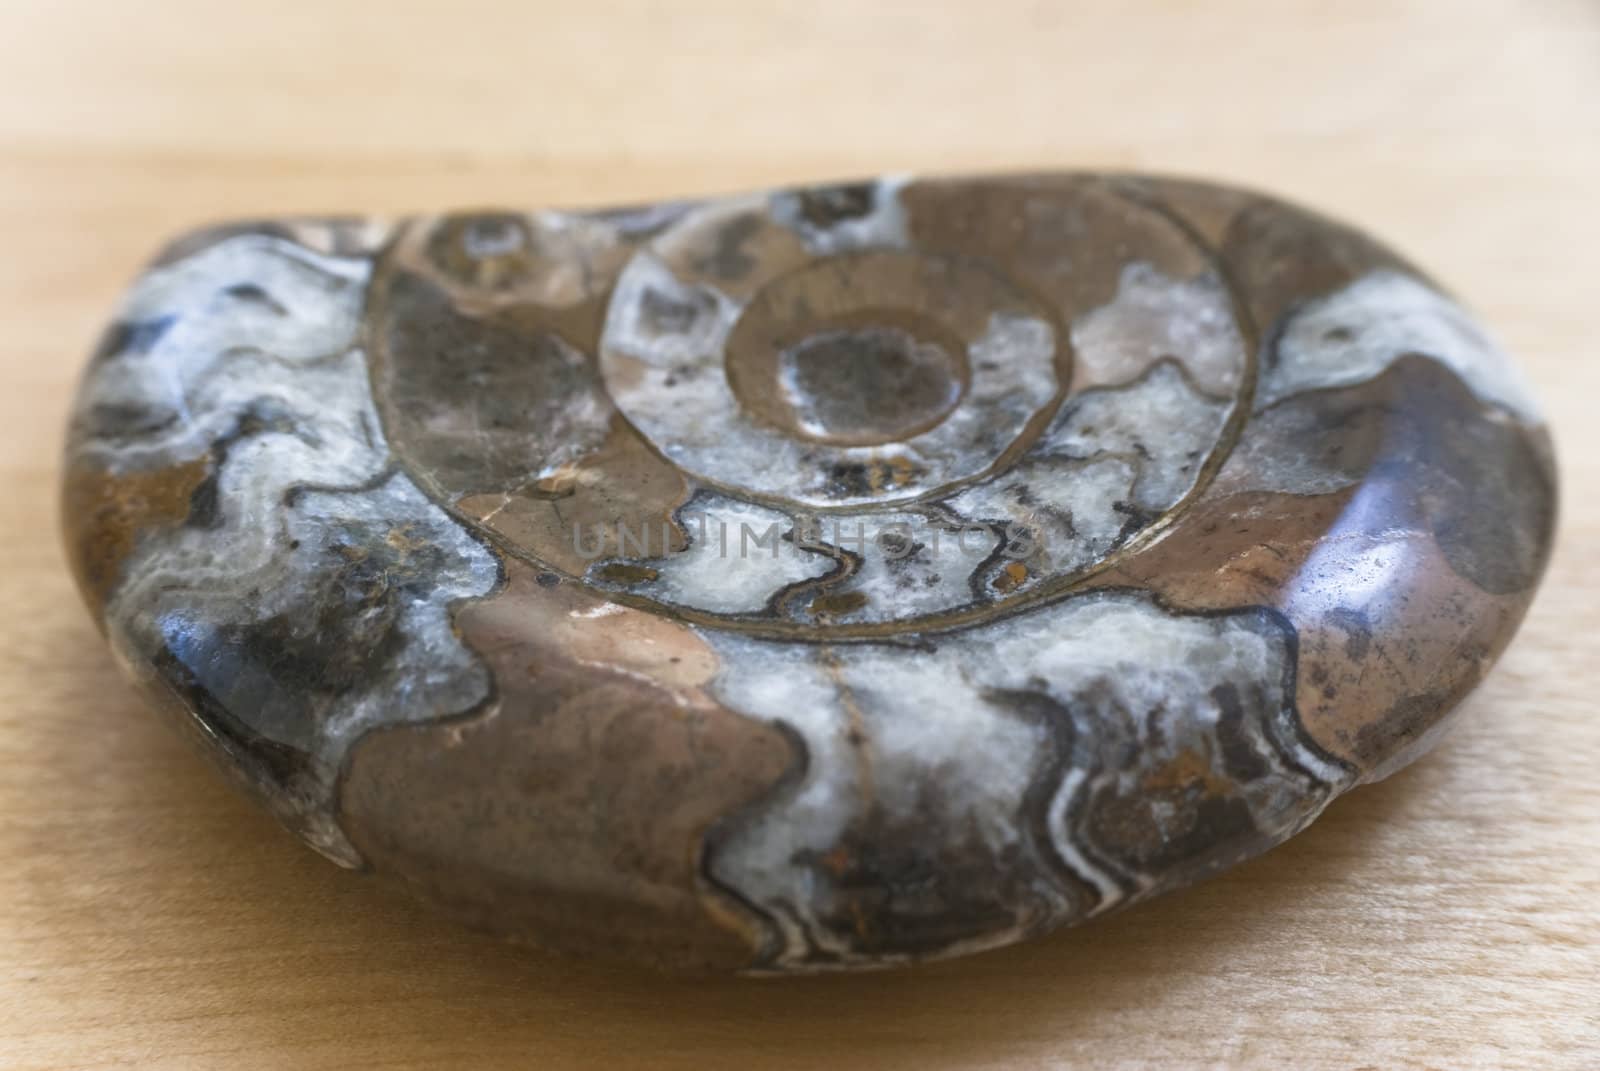 Fossil - Ammonite by frannyanne